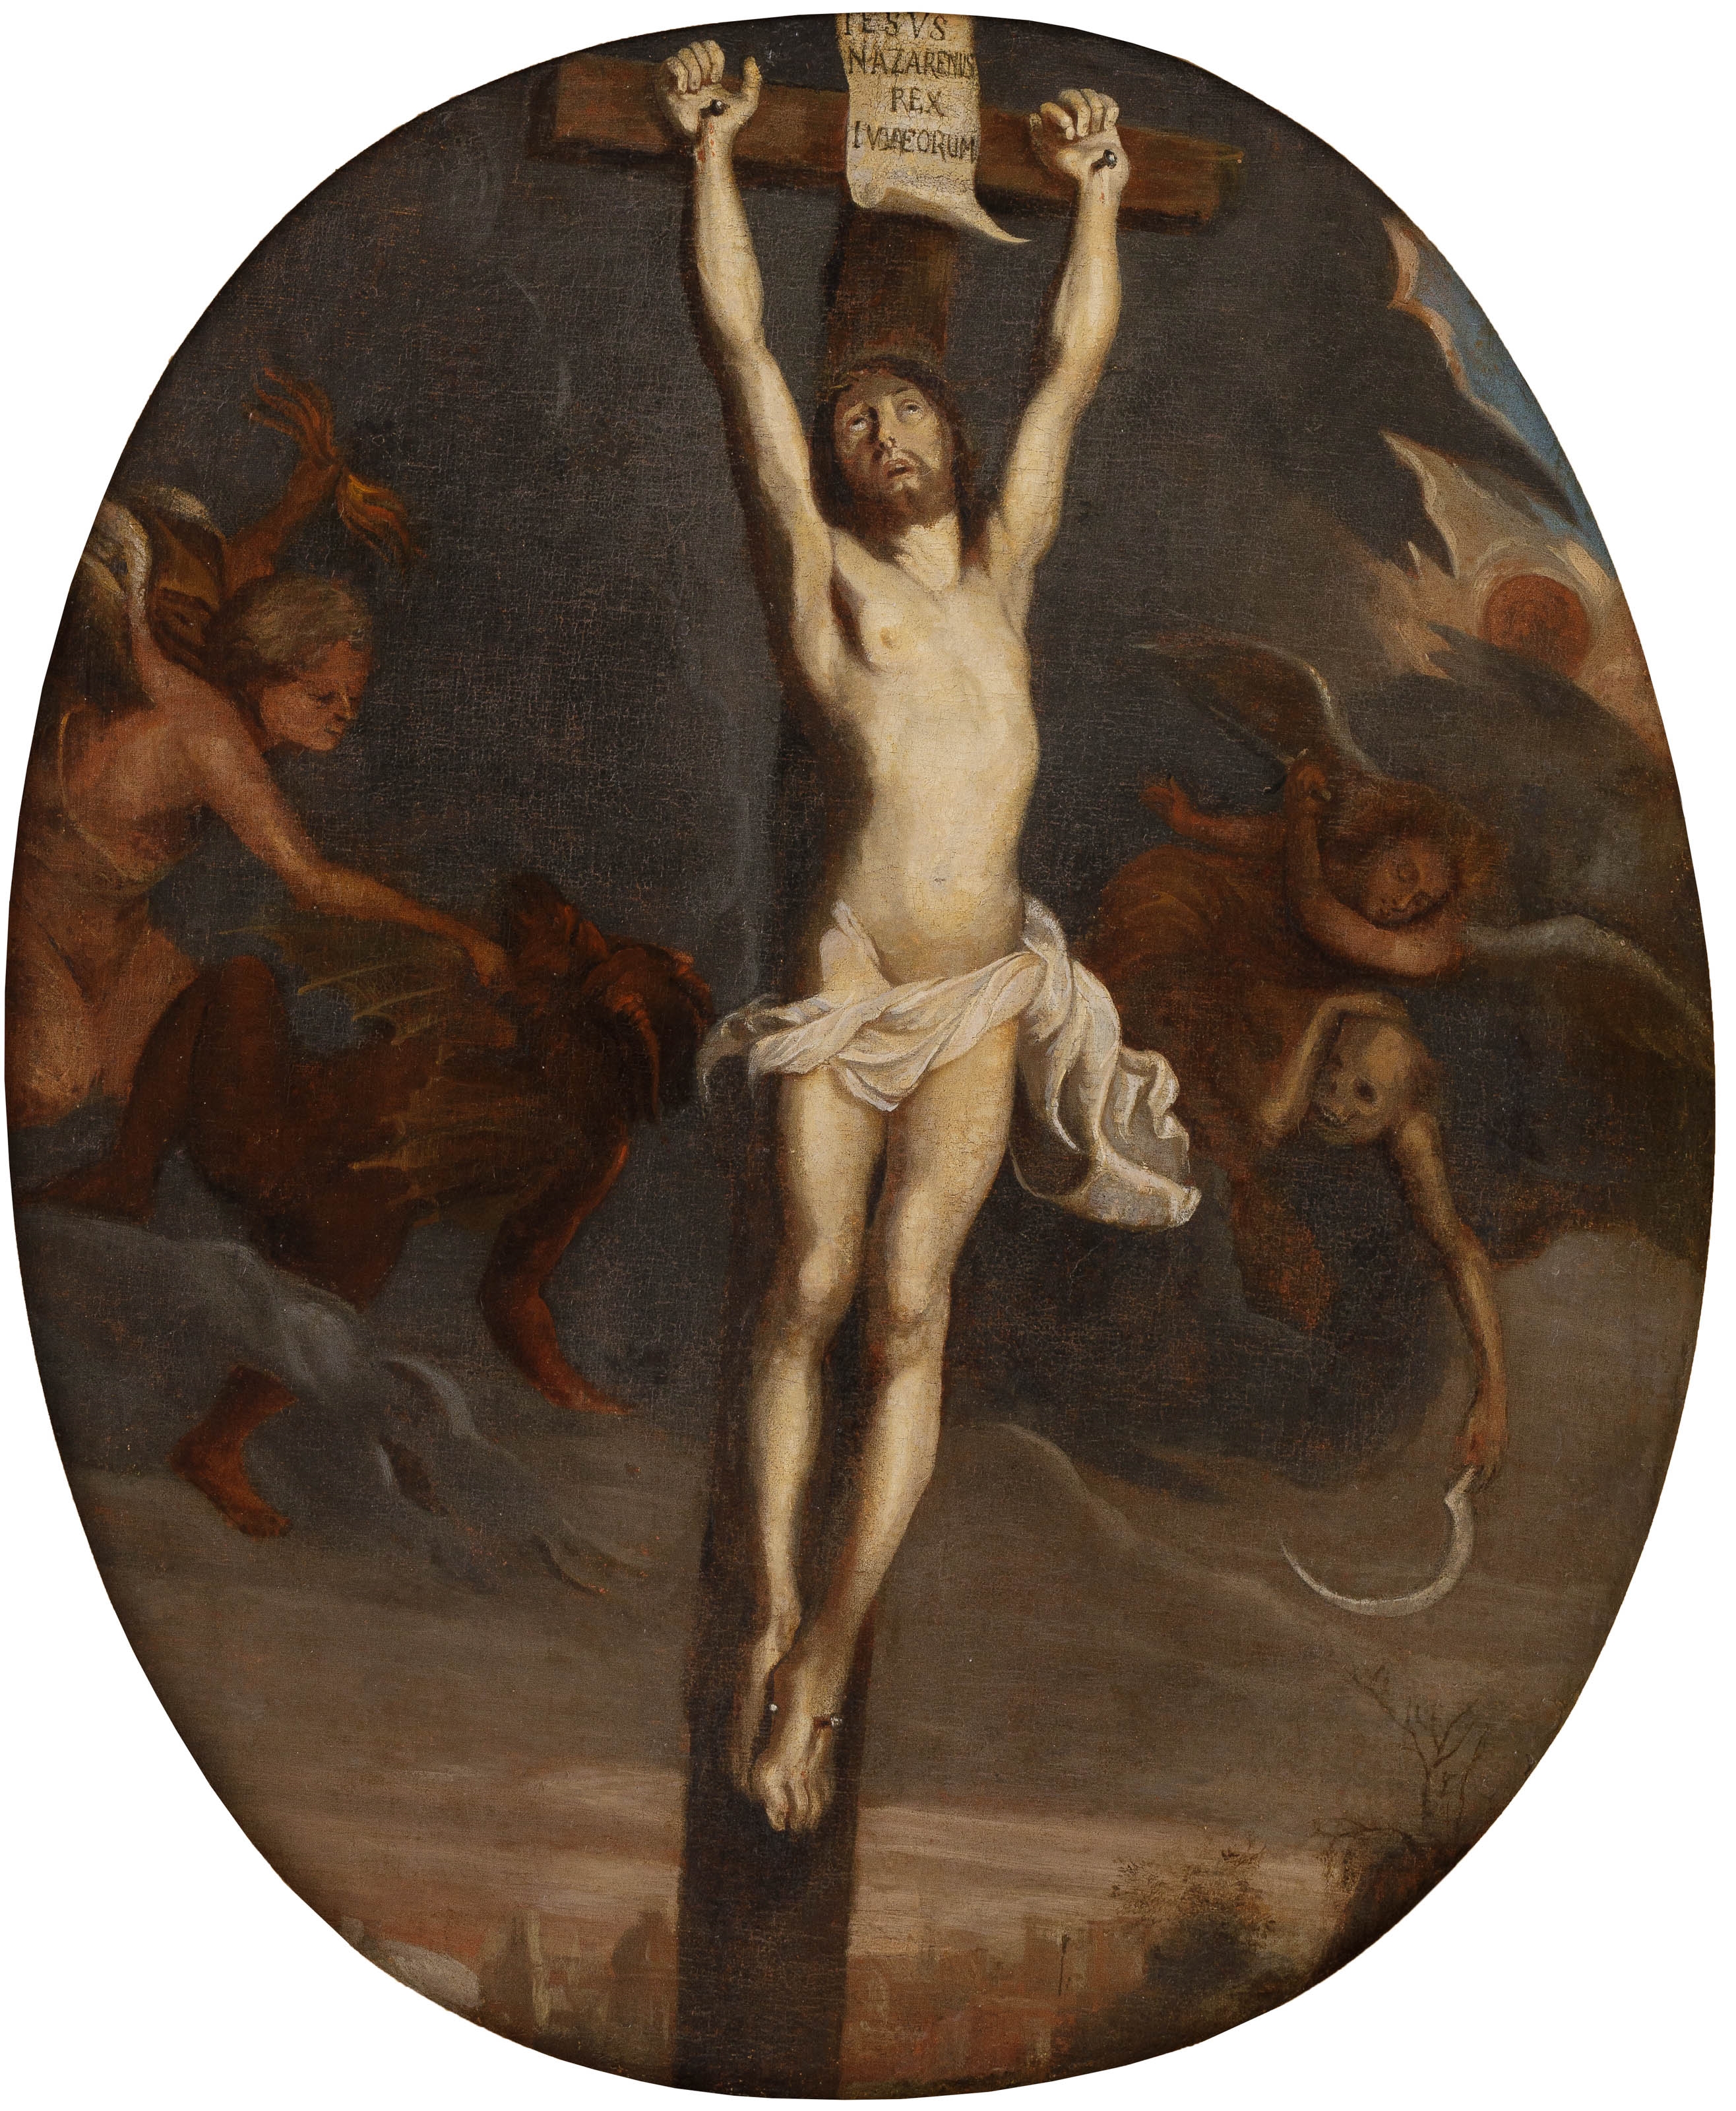 Christ on the cross surrounded by devilish figures